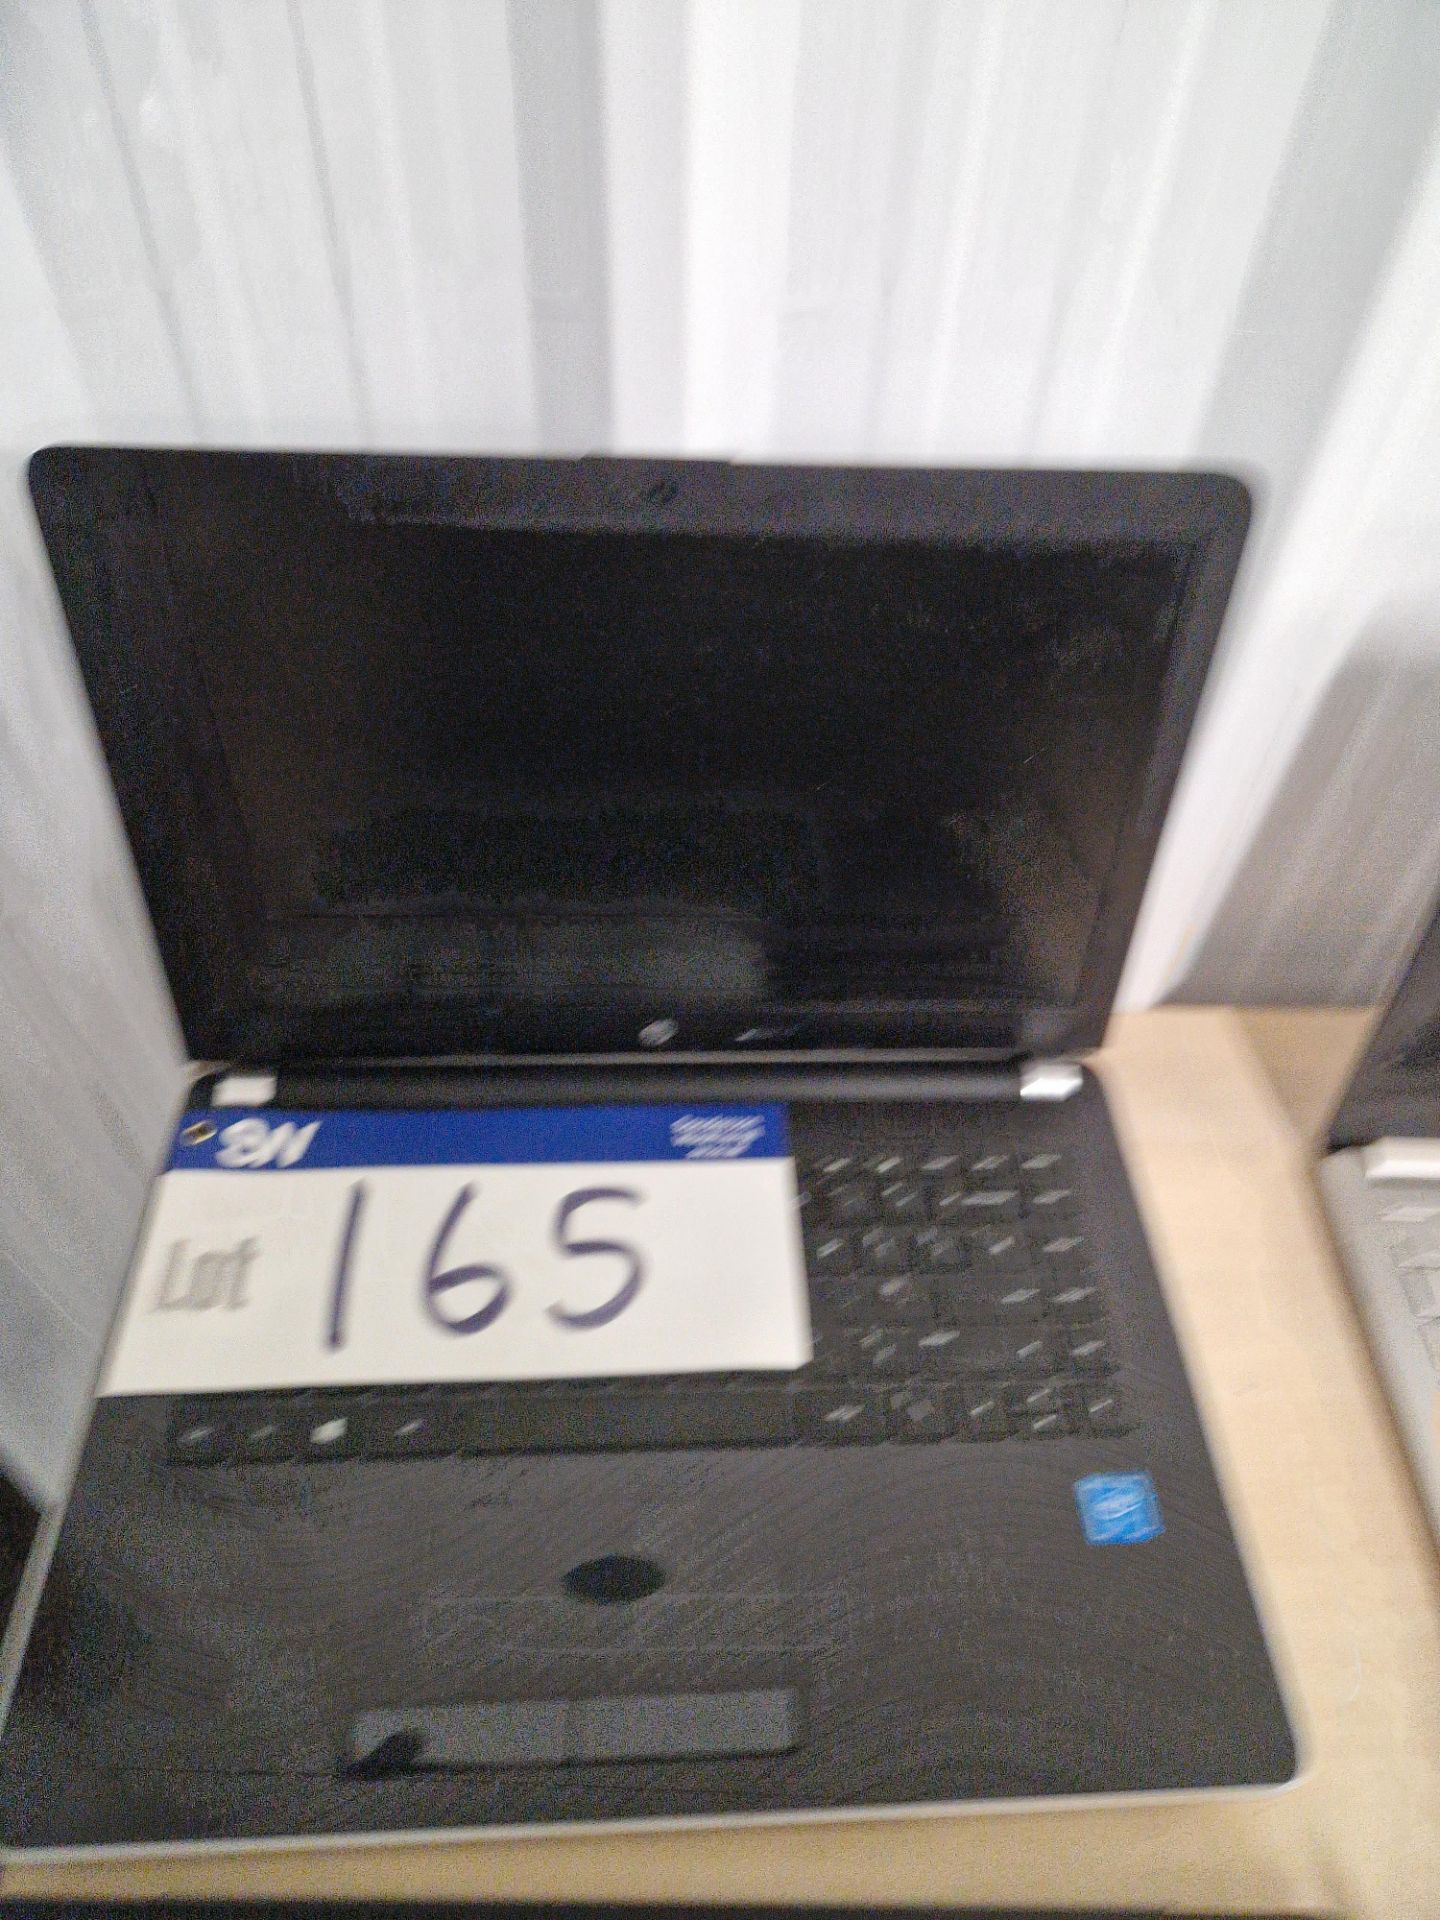 HP 14-BS043NA Intel Core Laptop (No Charger) (Hard Drive Wiped) Please read the following